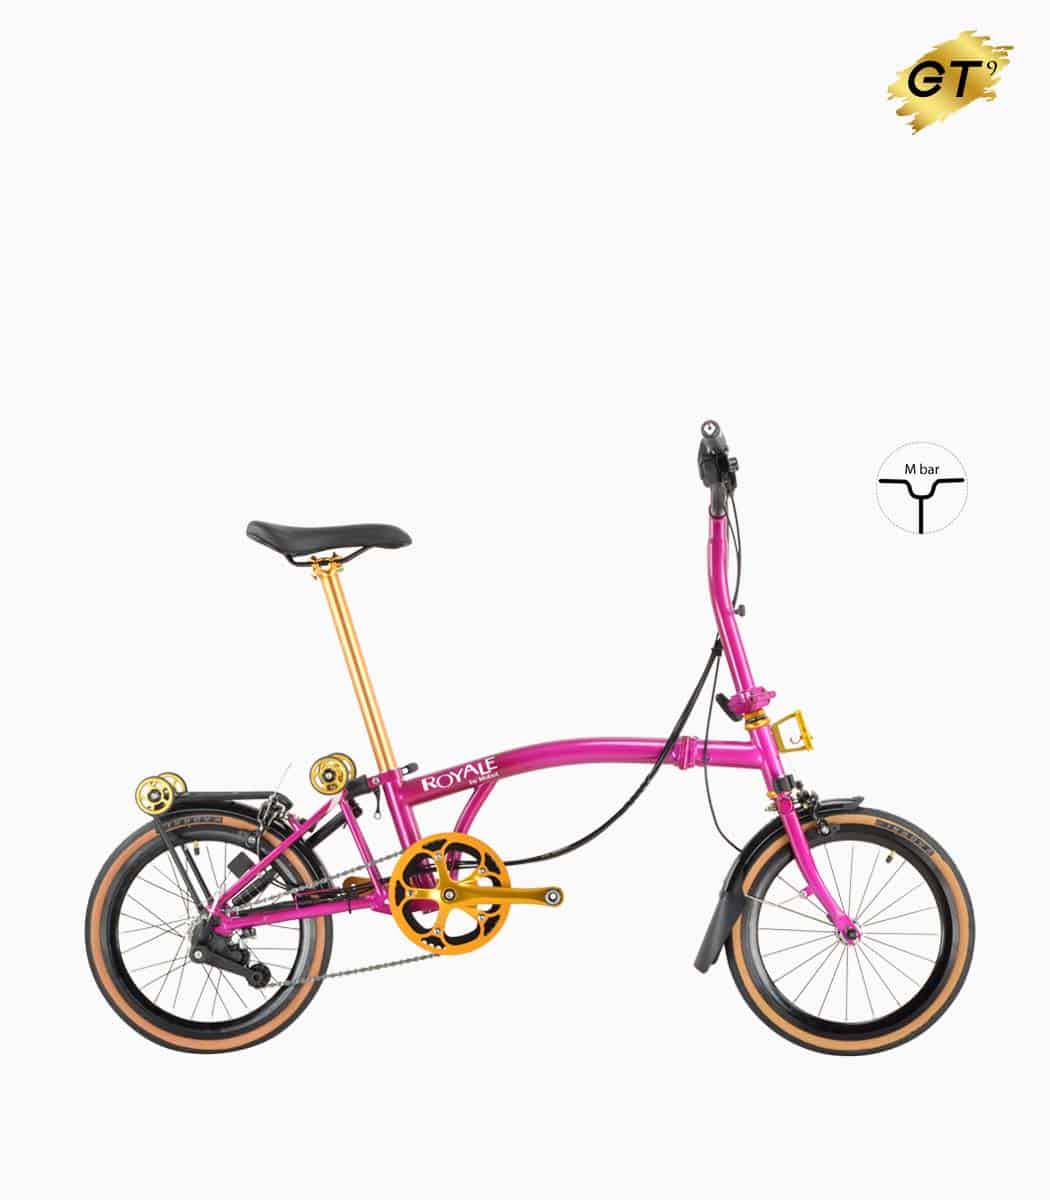 MOBOT ROYALE GT M9 (MAGENTA) foldable bicycle gold edition M-bar with tanwall tyres high profile rim right